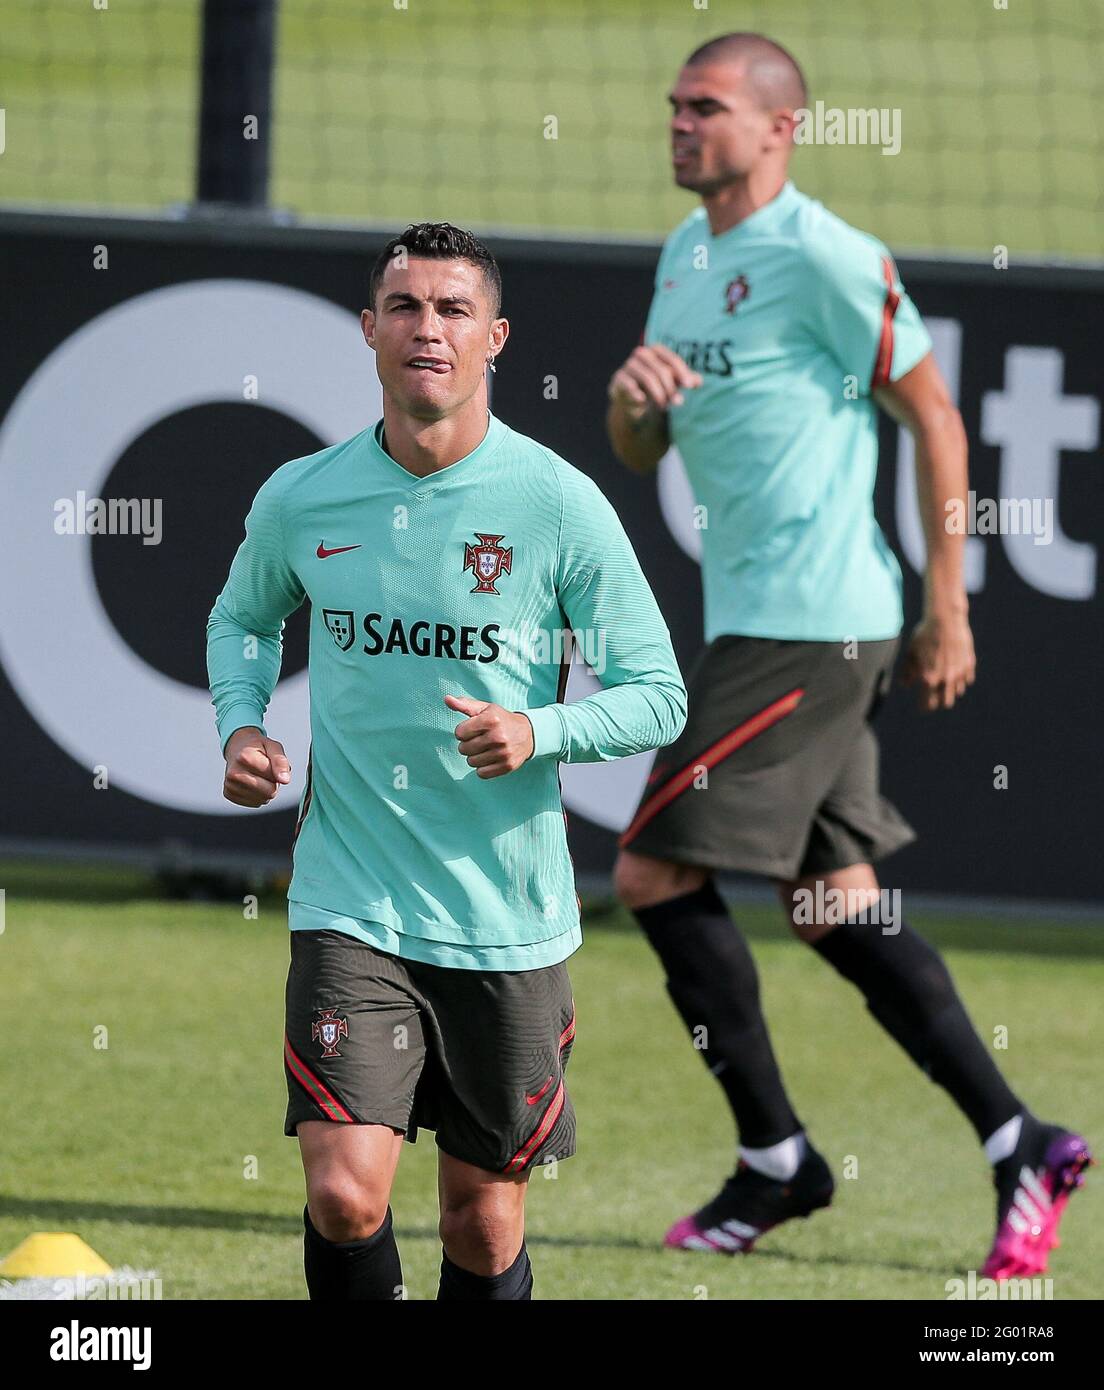 Cristiano Ronaldo, Pepe (Gerardo Santos / Global Images) during a Portugal  national football team training session for the preparation of Euro 2020 on  May 27, 2021 in Oeiras, Portugal. Photo by Gerardo